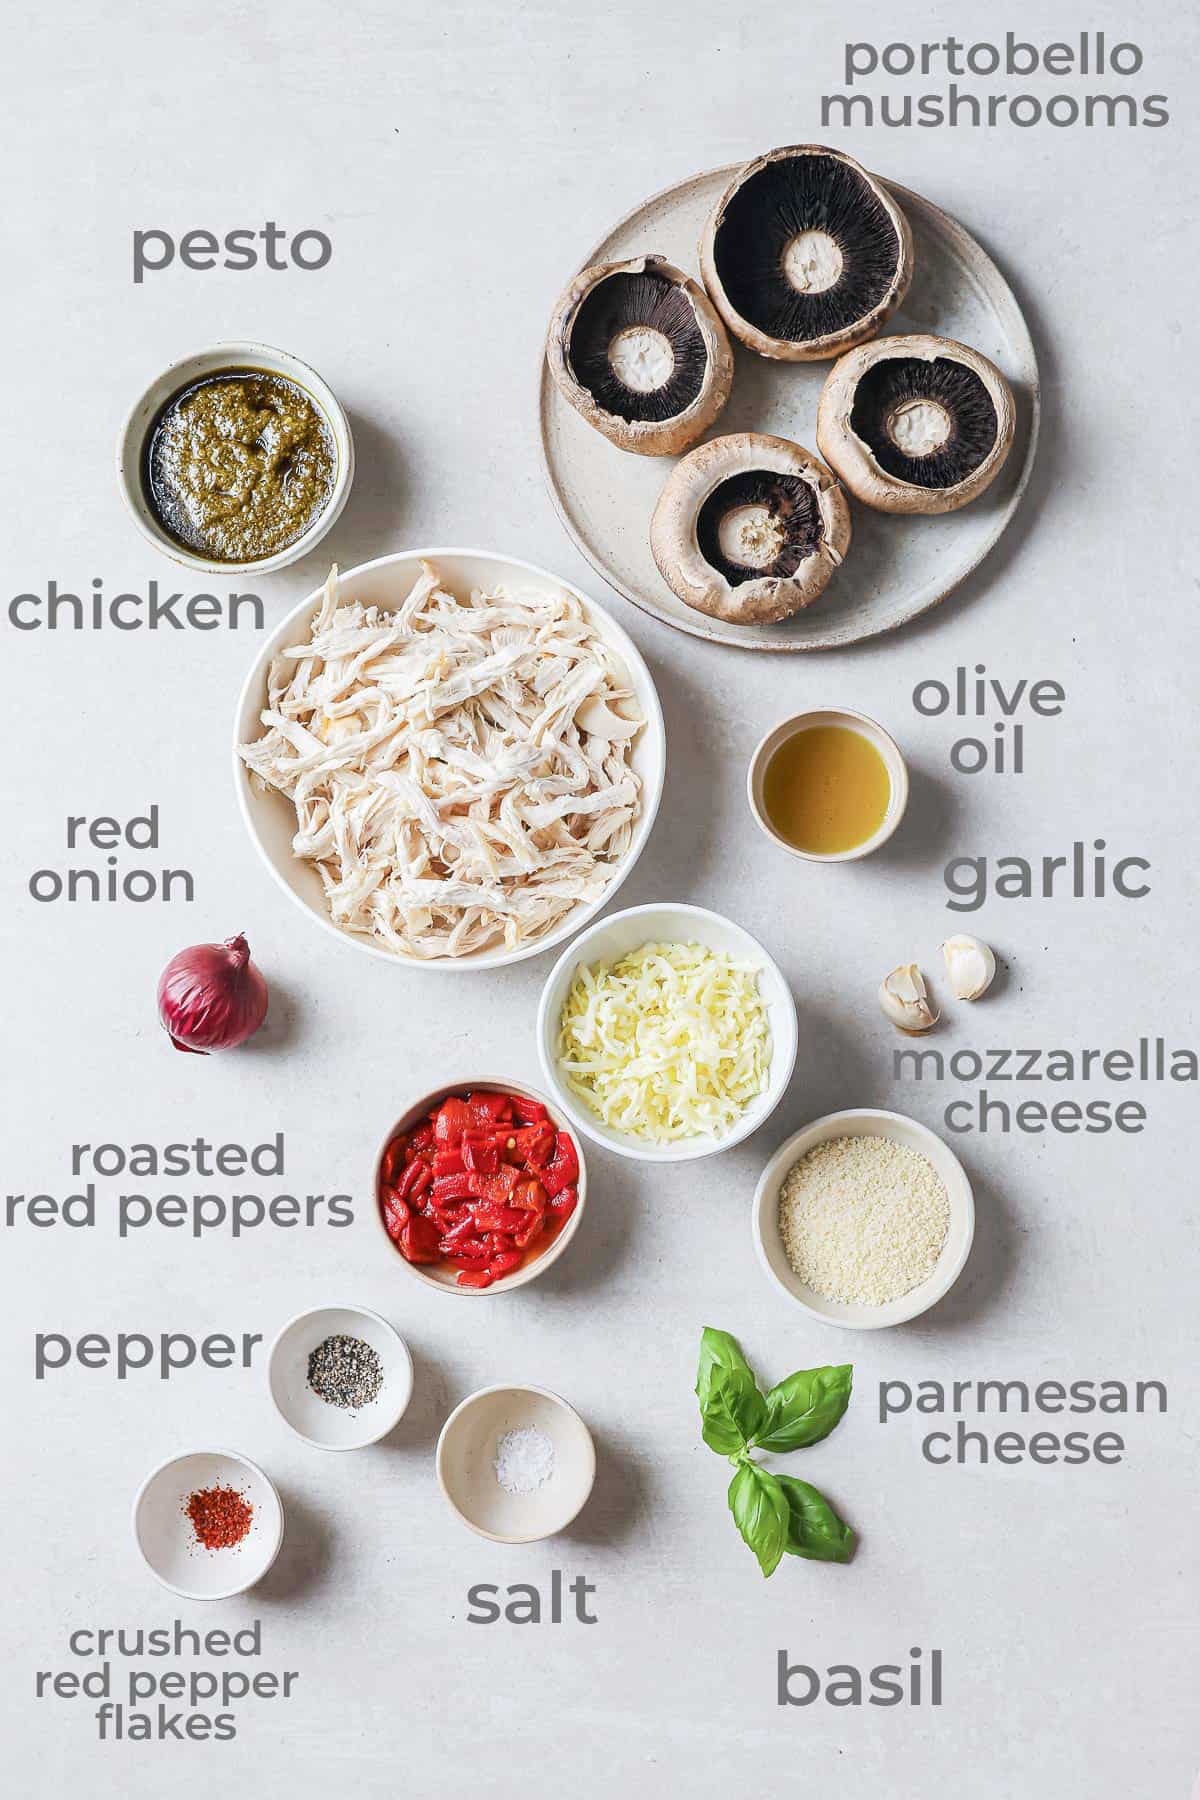 Ingredients all laid out to make stuffed mushrooms - portobello mushrooms, chicken, pesto, cheese, garlic, red peppers, basil, salt, and pepper.